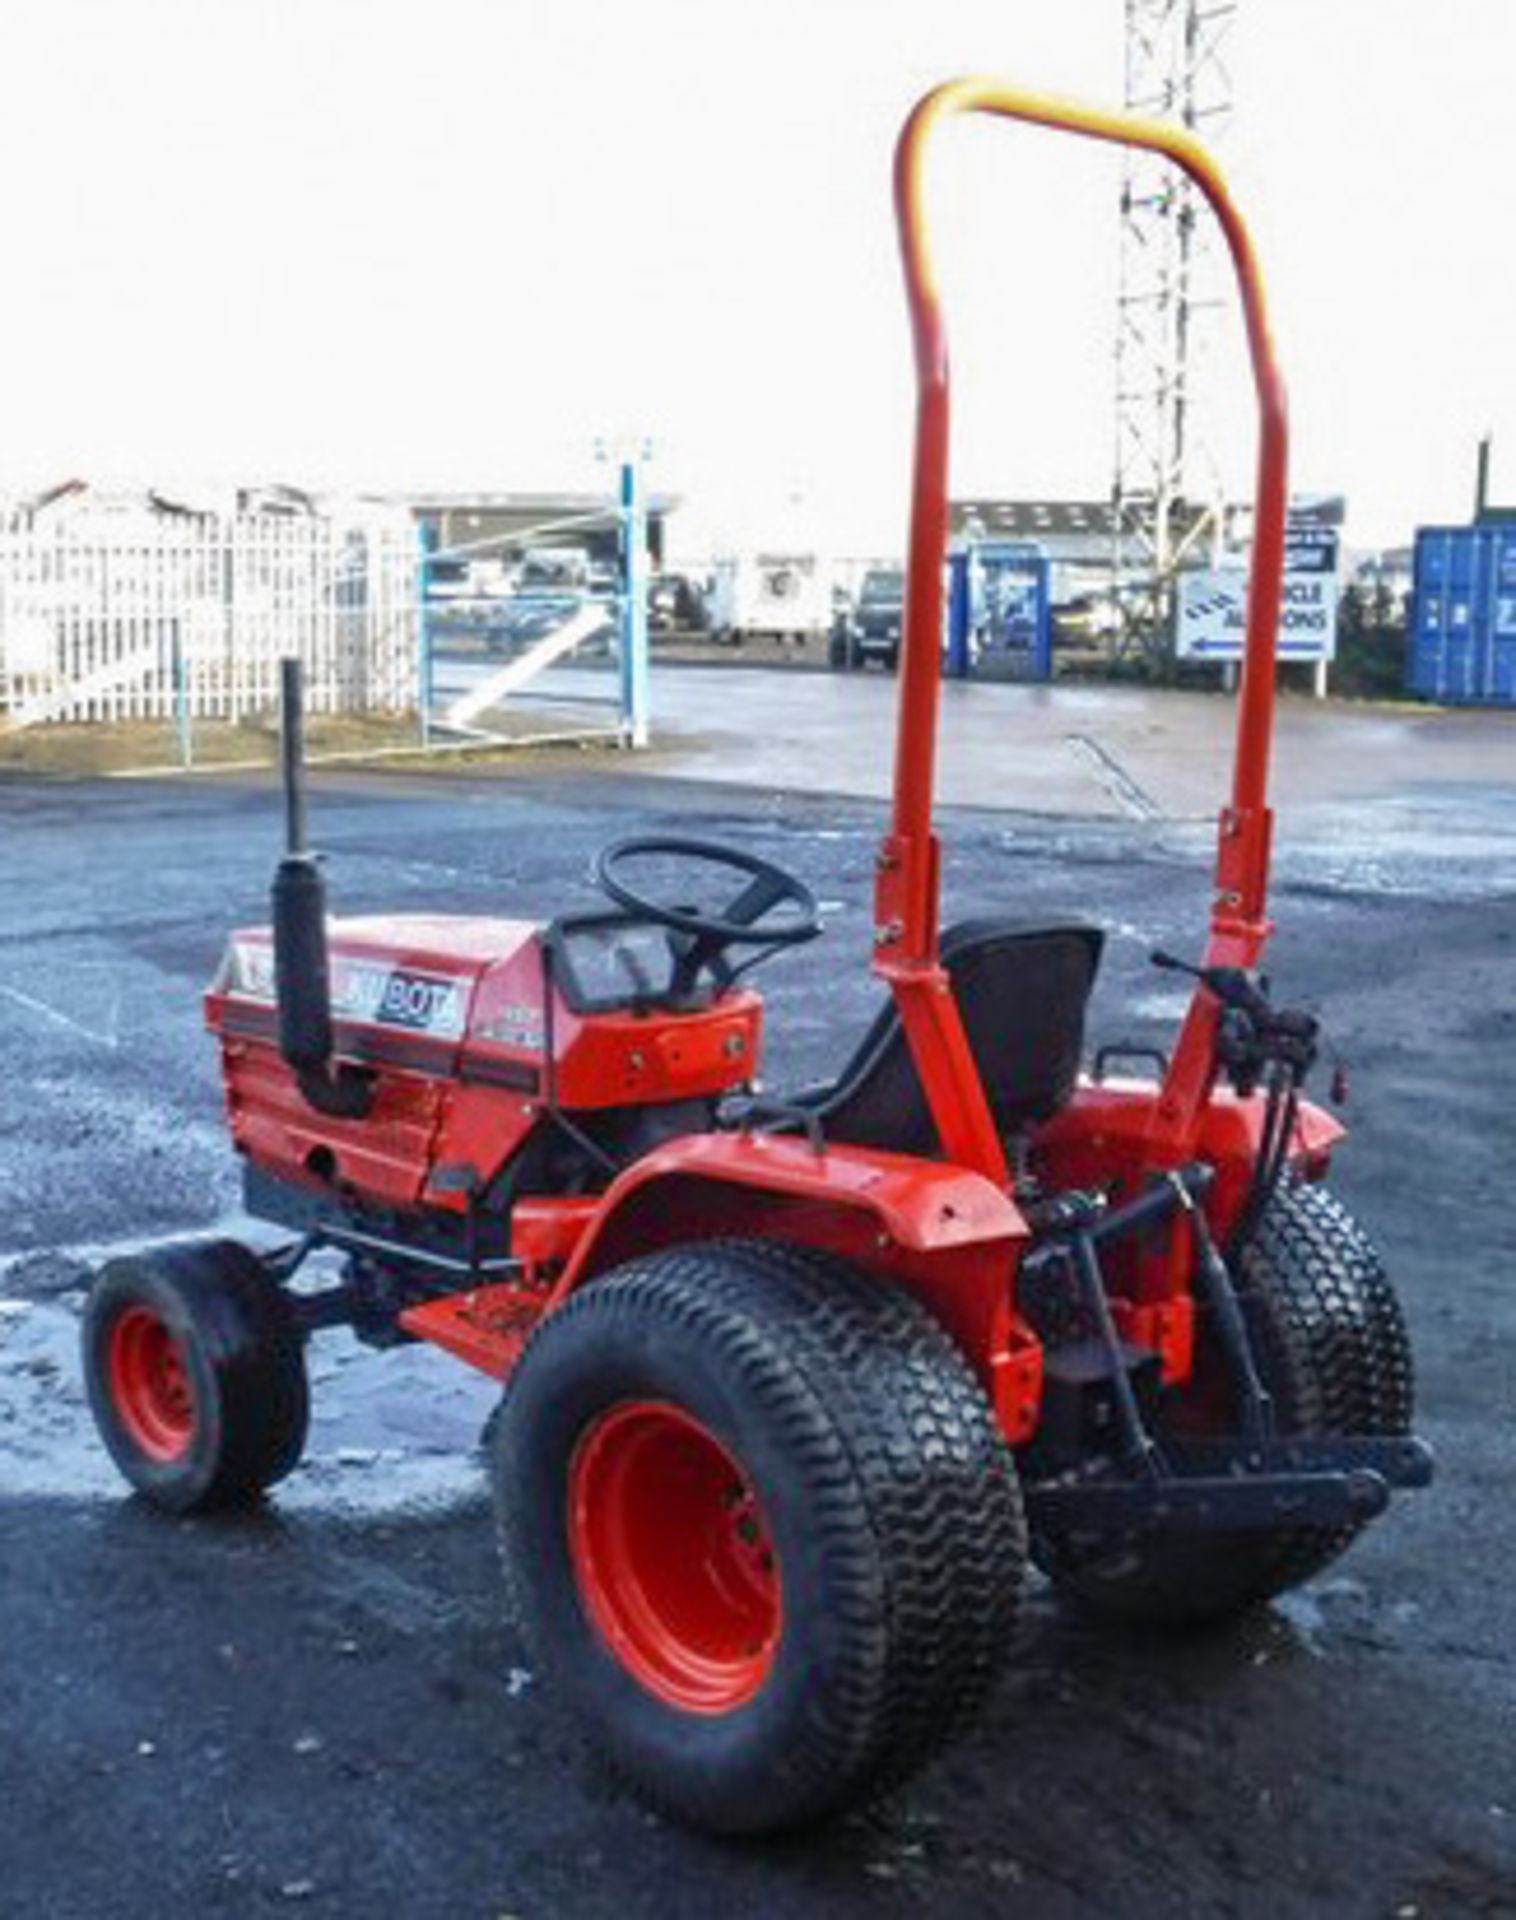 1998 (APPROX) B1750 TRACTOR SN 65435. 20HP 4 WHEEL DRIVE TURF TYRES PTO AND 3 POINT LINKAGE. 665 H - Image 4 of 9